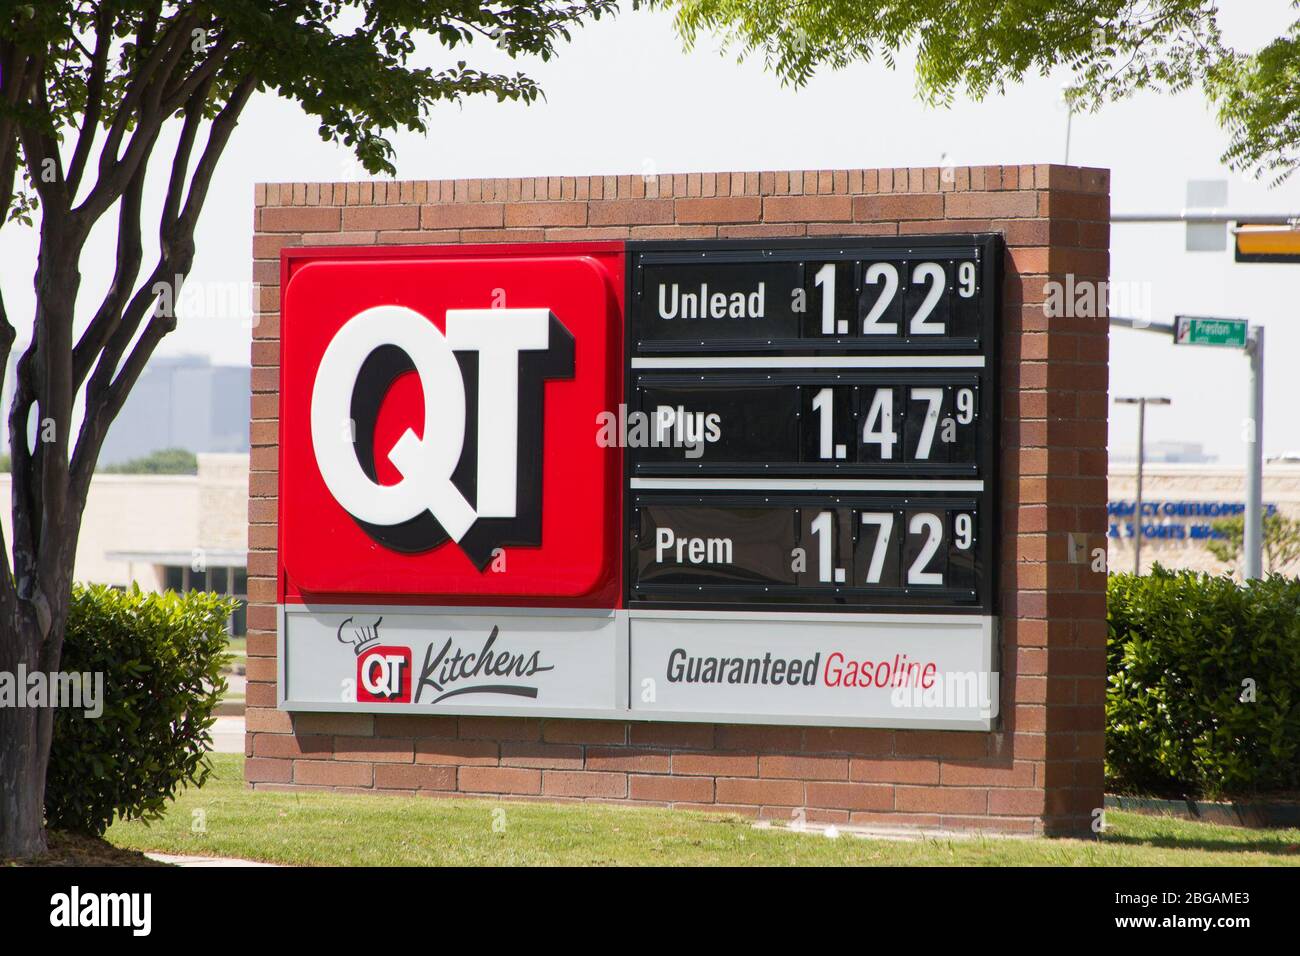 Beijing, China. 20th Apr, 2020. Photo taken on April 20, 2020 shows the gas prices at a gas station in Plano, Texas, the United States. U.S. oil prices crashed to the negative territory for the first time in history on Monday. The West Texas Intermediate (WTI) for May delivery shed 55.9 U.S. dollars, or over 305 percent, to settle at -37.63 dollars a barrel on the New York Mercantile Exchange. Credit: Dan Tian/Xinhua/Alamy Live News Stock Photo